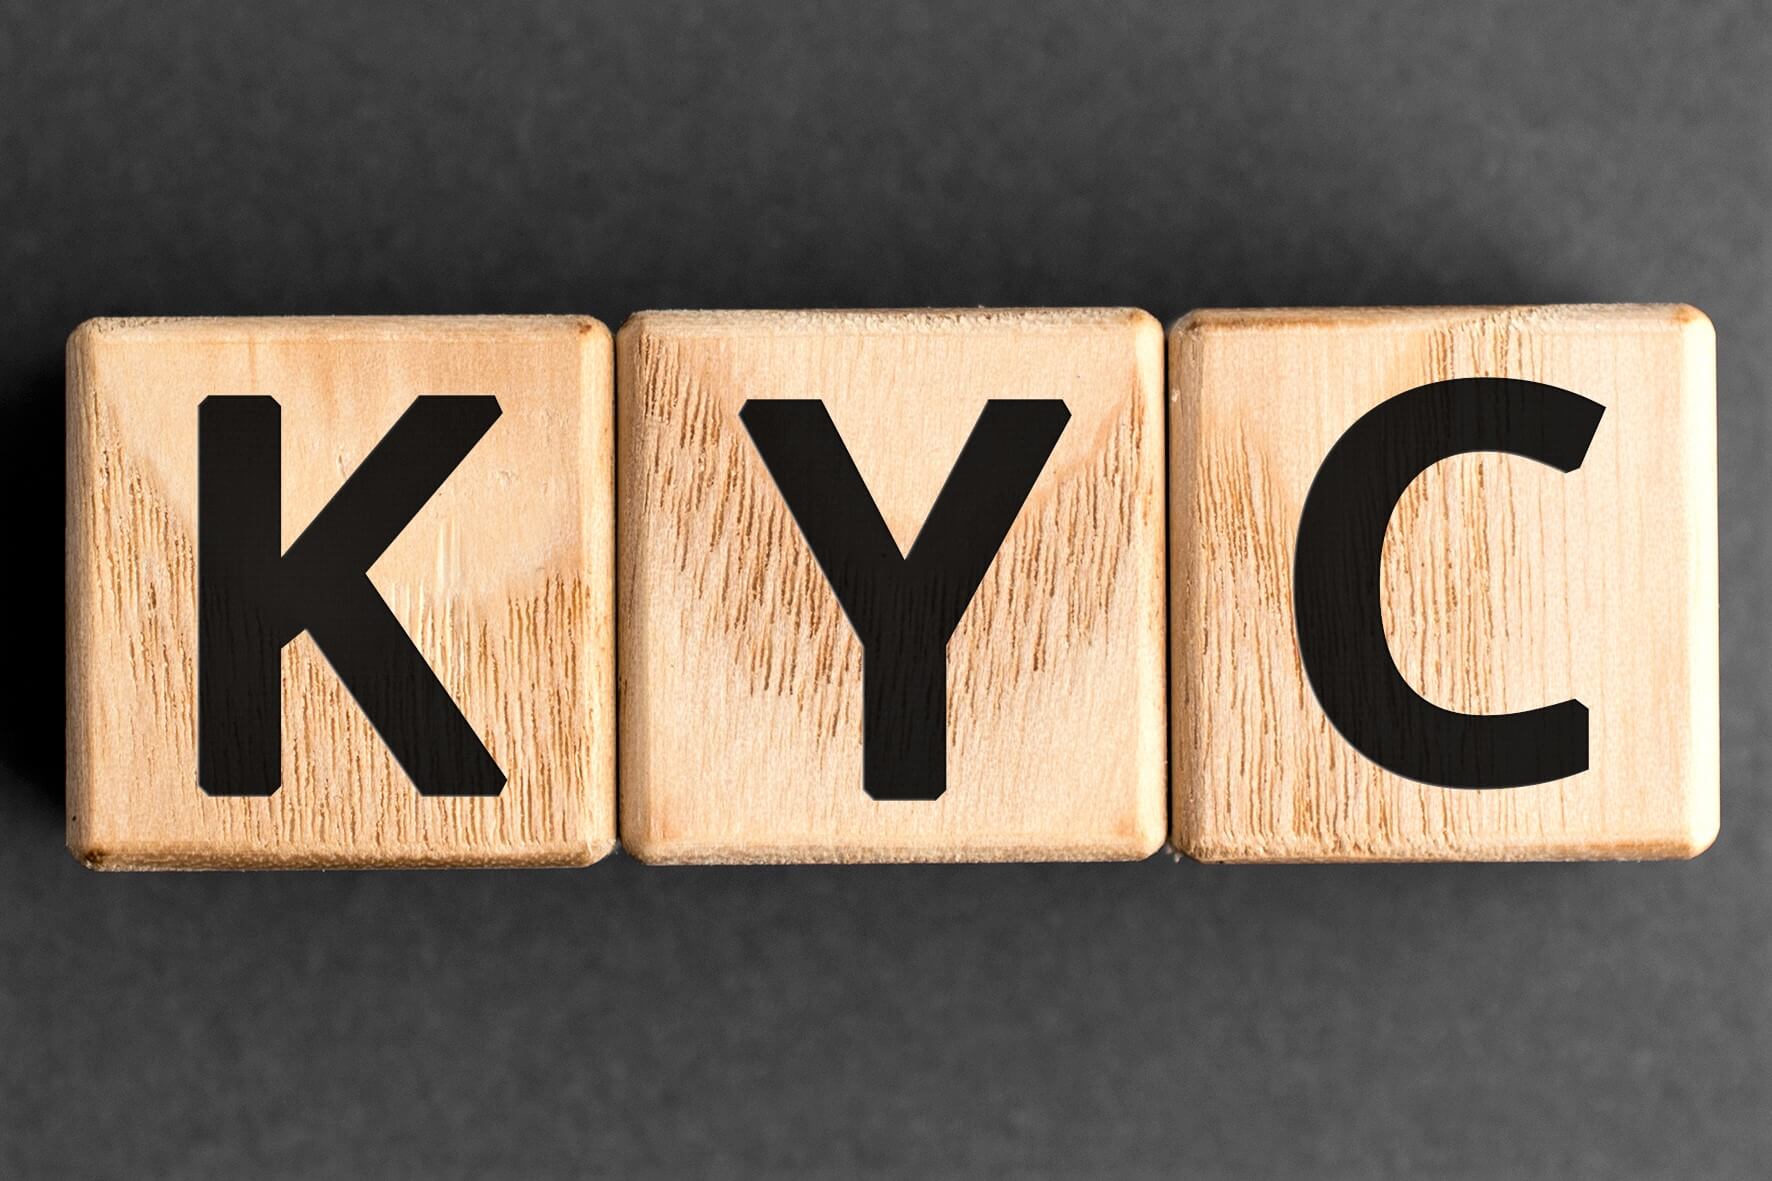 Financial Sector Players Call for Improved KYC Regulations